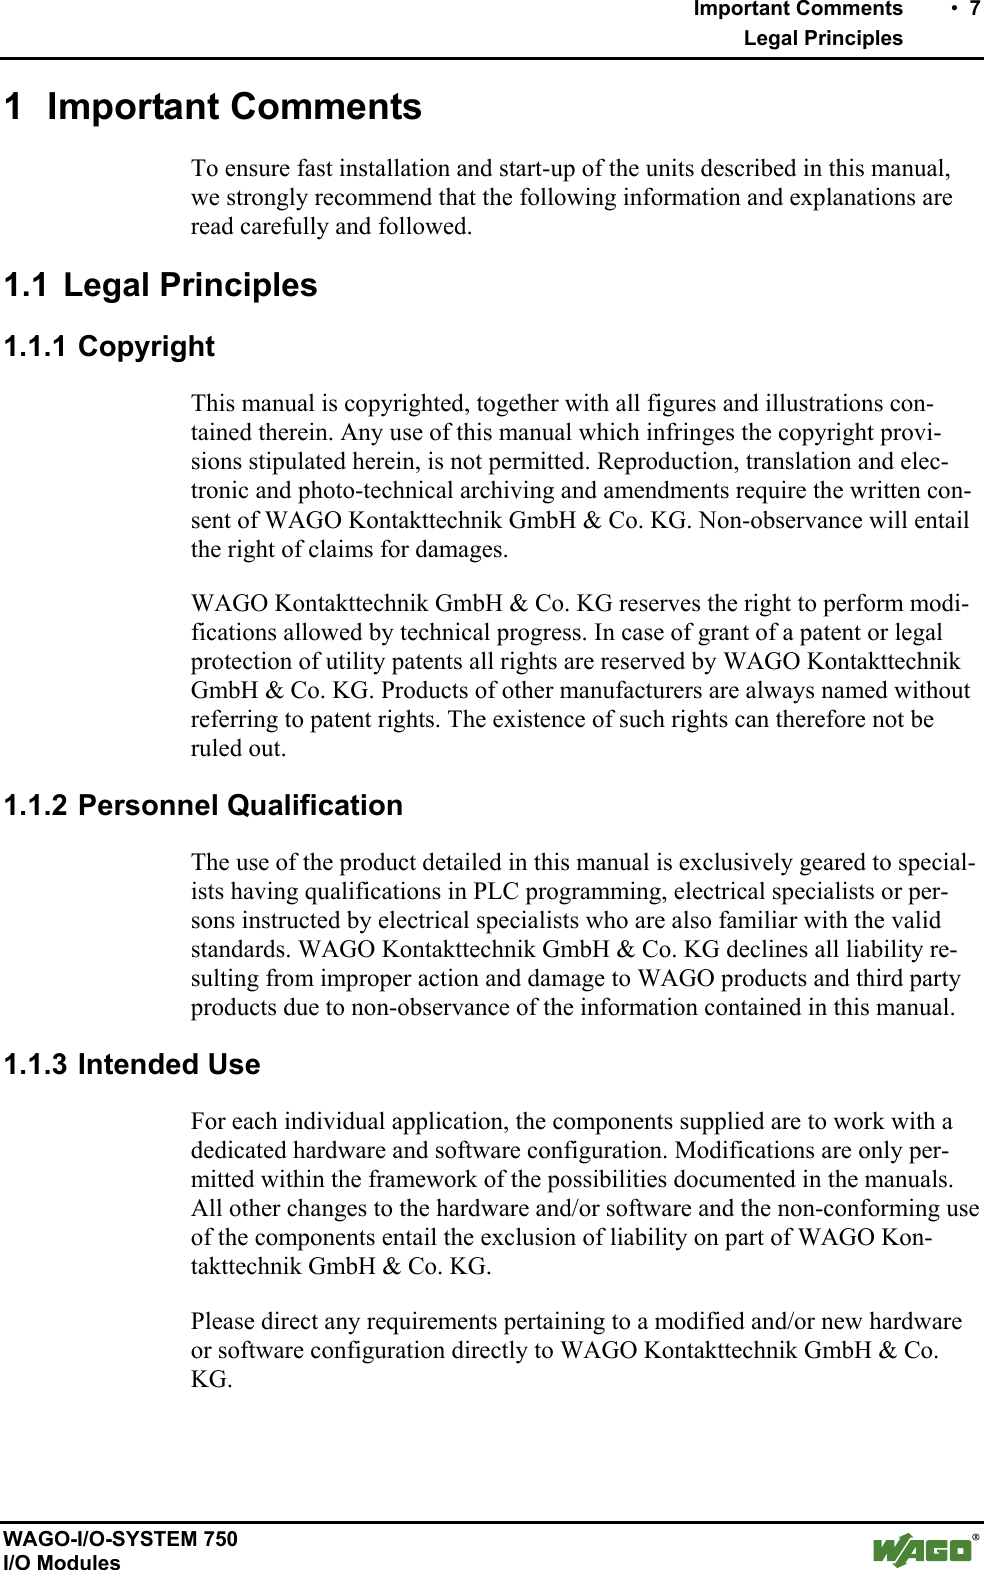    Important Comments    •  7    Legal Principles   WAGO-I/O-SYSTEM 750 I/O Modules 1 Important Comments To ensure fast installation and start-up of the units described in this manual, we strongly recommend that the following information and explanations are read carefully and followed. 1.1 Legal Principles 1.1.1 Copyright This manual is copyrighted, together with all figures and illustrations con-tained therein. Any use of this manual which infringes the copyright provi-sions stipulated herein, is not permitted. Reproduction, translation and elec-tronic and photo-technical archiving and amendments require the written con-sent of WAGO Kontakttechnik GmbH &amp; Co. KG. Non-observance will entail the right of claims for damages. WAGO Kontakttechnik GmbH &amp; Co. KG reserves the right to perform modi-fications allowed by technical progress. In case of grant of a patent or legal protection of utility patents all rights are reserved by WAGO Kontakttechnik GmbH &amp; Co. KG. Products of other manufacturers are always named without referring to patent rights. The existence of such rights can therefore not be ruled out. 1.1.2 Personnel Qualification The use of the product detailed in this manual is exclusively geared to special-ists having qualifications in PLC programming, electrical specialists or per-sons instructed by electrical specialists who are also familiar with the valid standards. WAGO Kontakttechnik GmbH &amp; Co. KG declines all liability re-sulting from improper action and damage to WAGO products and third party products due to non-observance of the information contained in this manual. 1.1.3 Intended Use For each individual application, the components supplied are to work with a dedicated hardware and software configuration. Modifications are only per-mitted within the framework of the possibilities documented in the manuals. All other changes to the hardware and/or software and the non-conforming use of the components entail the exclusion of liability on part of WAGO Kon-takttechnik GmbH &amp; Co. KG. Please direct any requirements pertaining to a modified and/or new hardware or software configuration directly to WAGO Kontakttechnik GmbH &amp; Co. KG. 